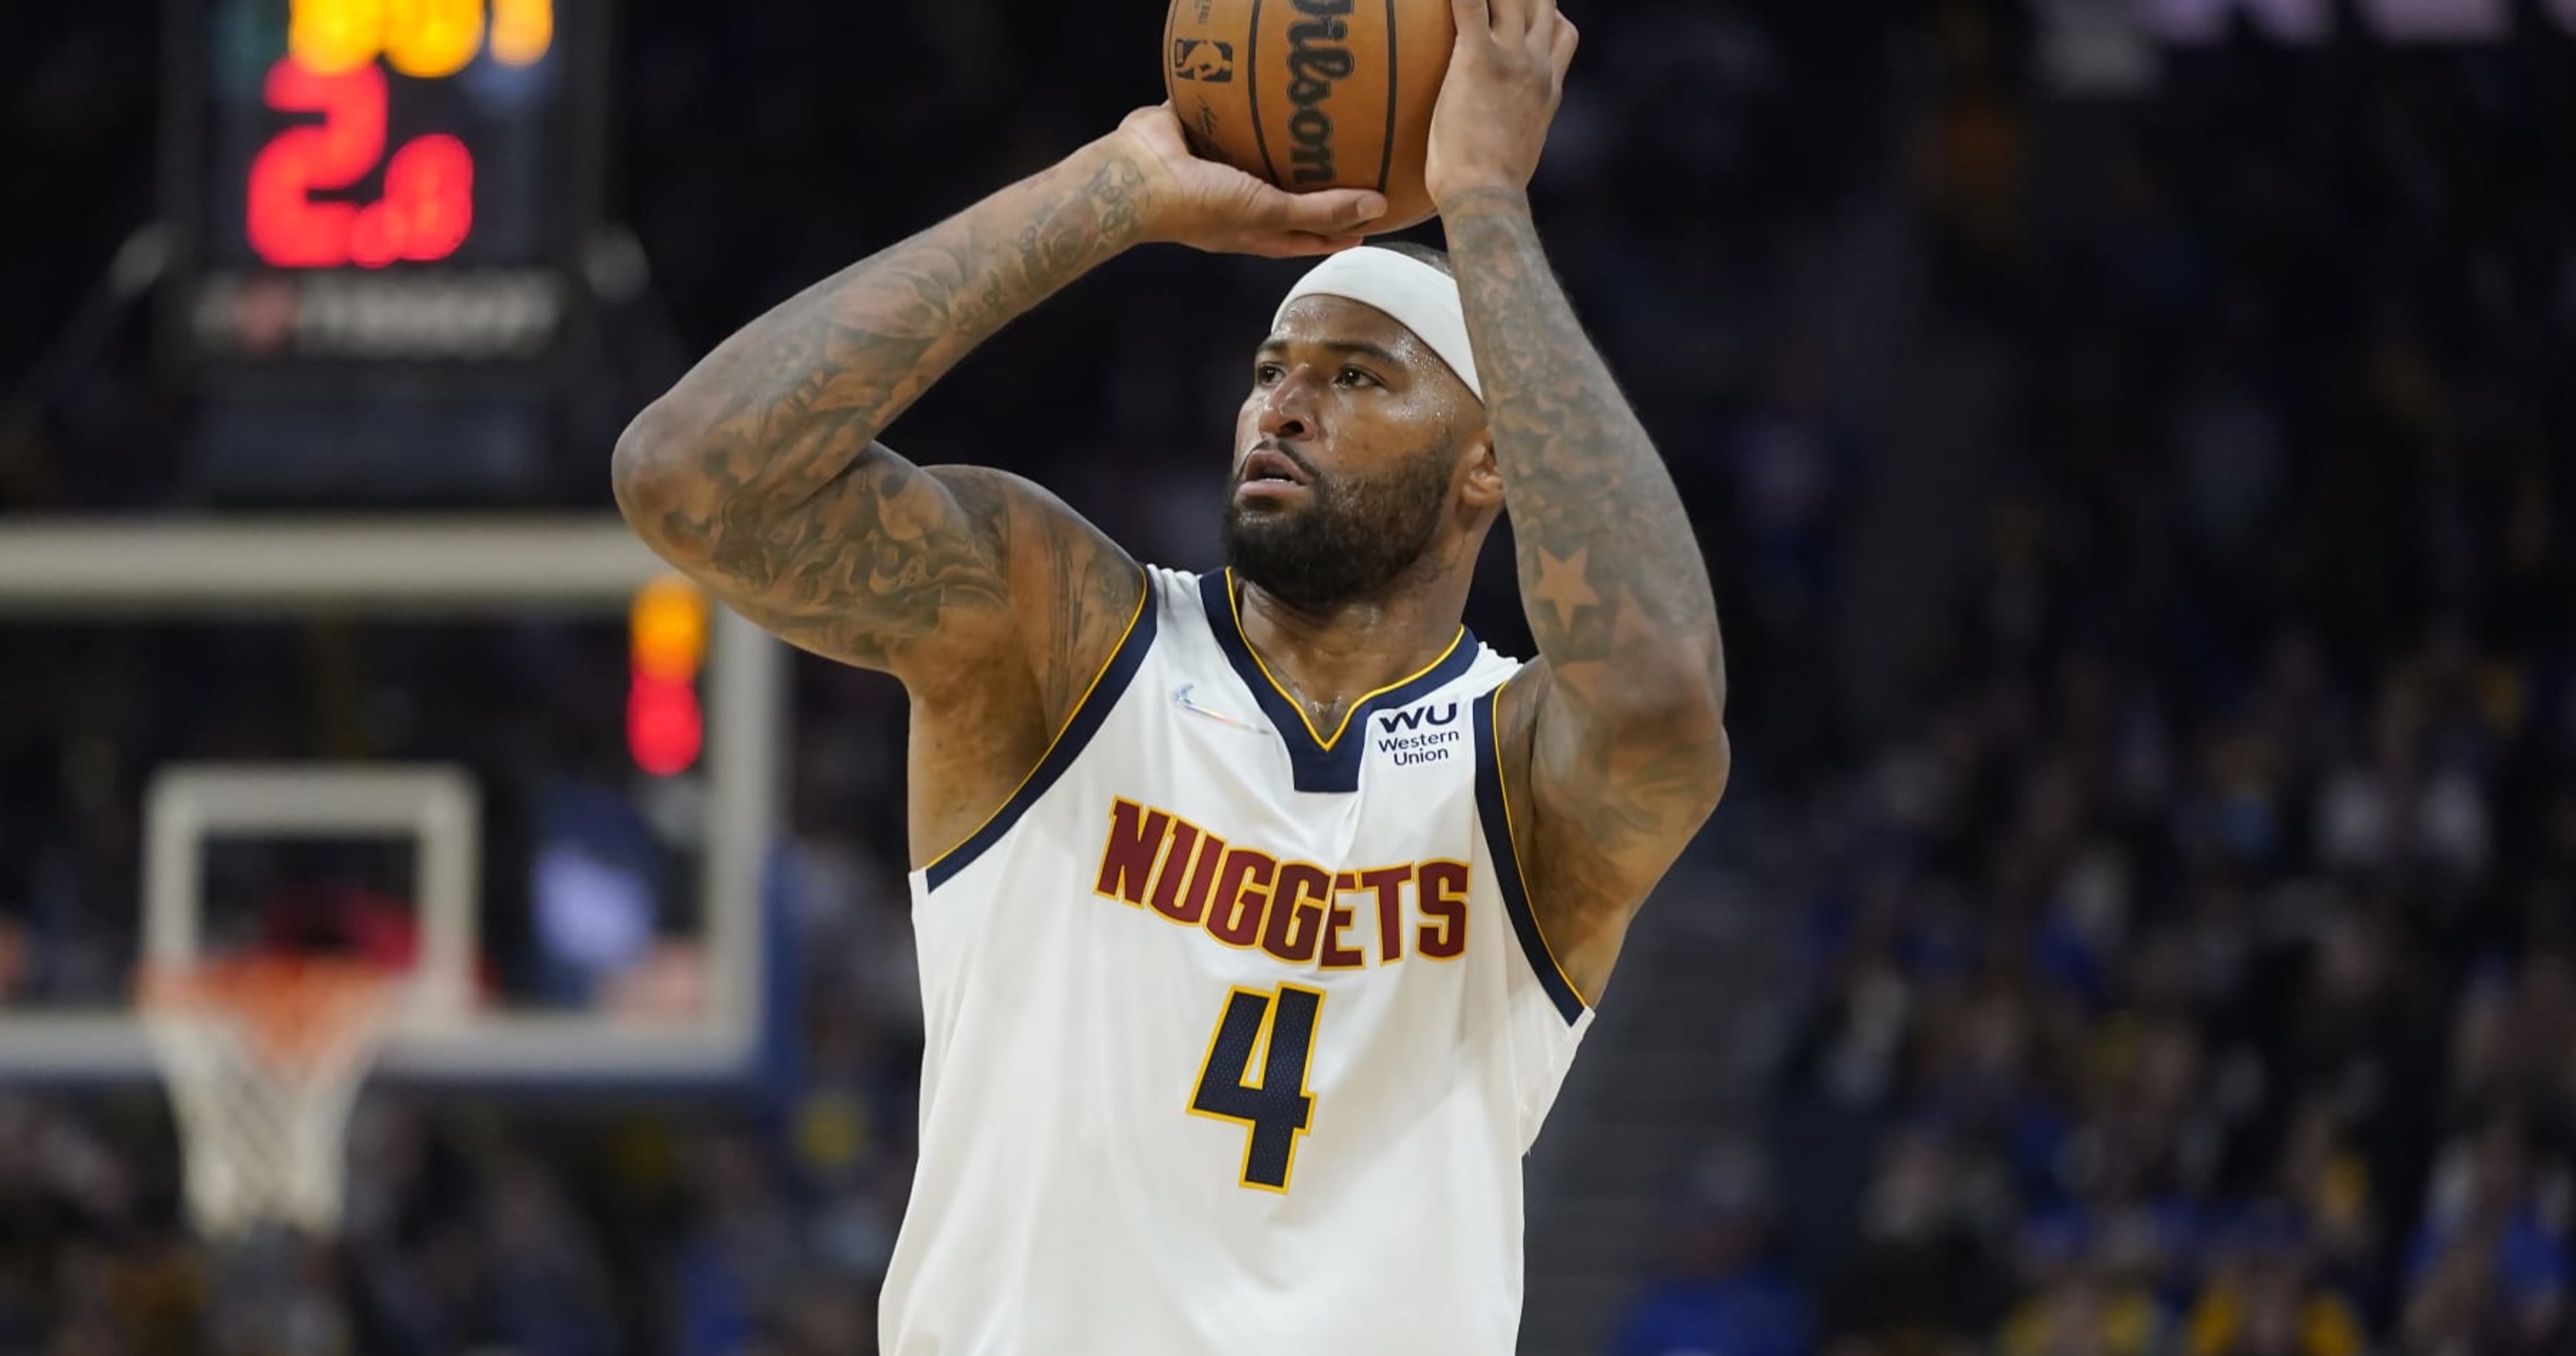 FreeAgent DeMarcus Cousins Says He'd 'Love to Help' Kings Return to